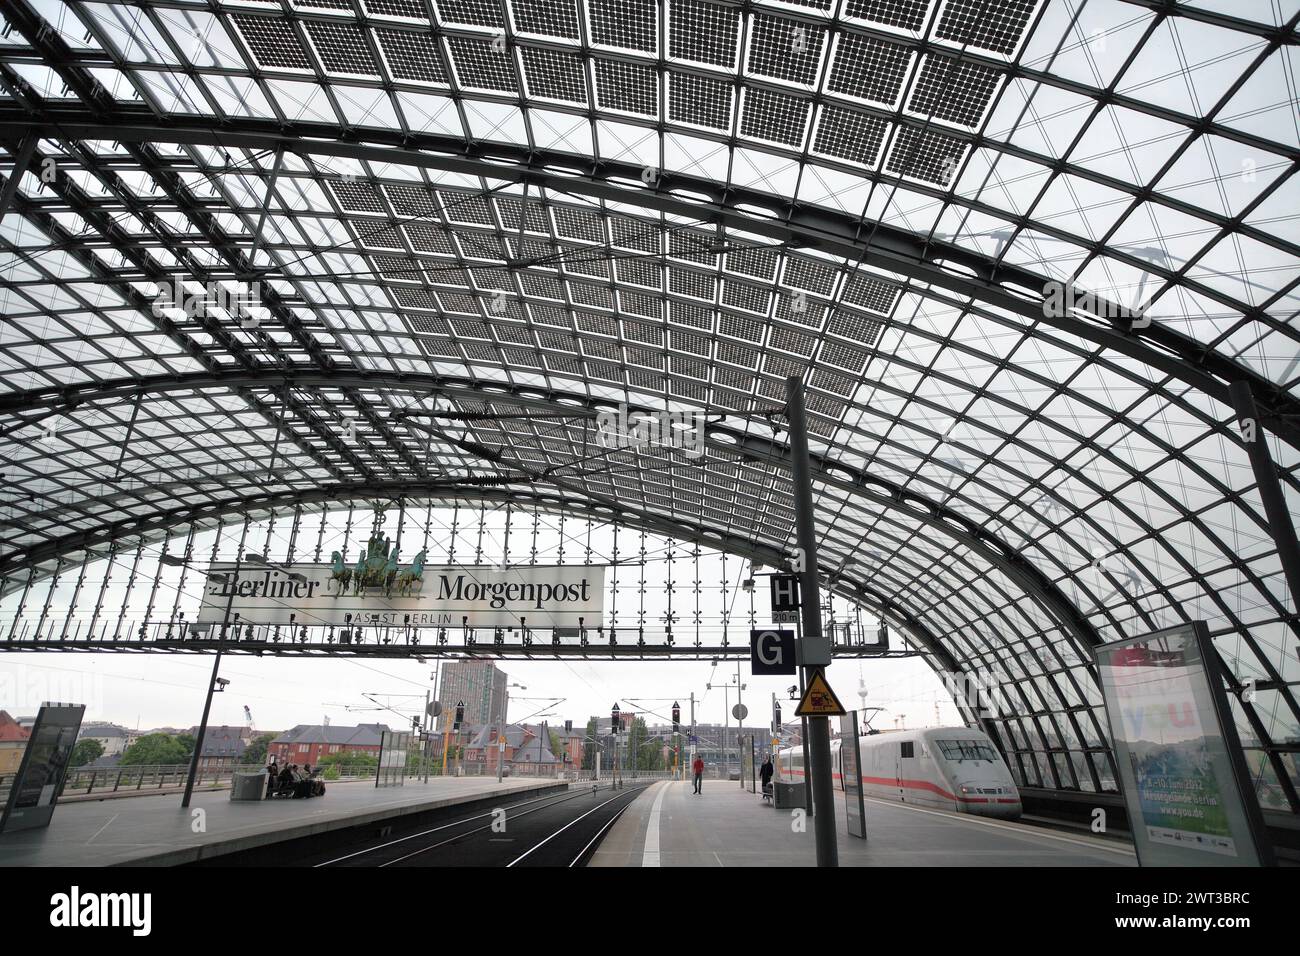 Photovoltaic cells embedded in the roof of Berlin's central station (Lehrter Bahnhof), Germany. Stock Photo